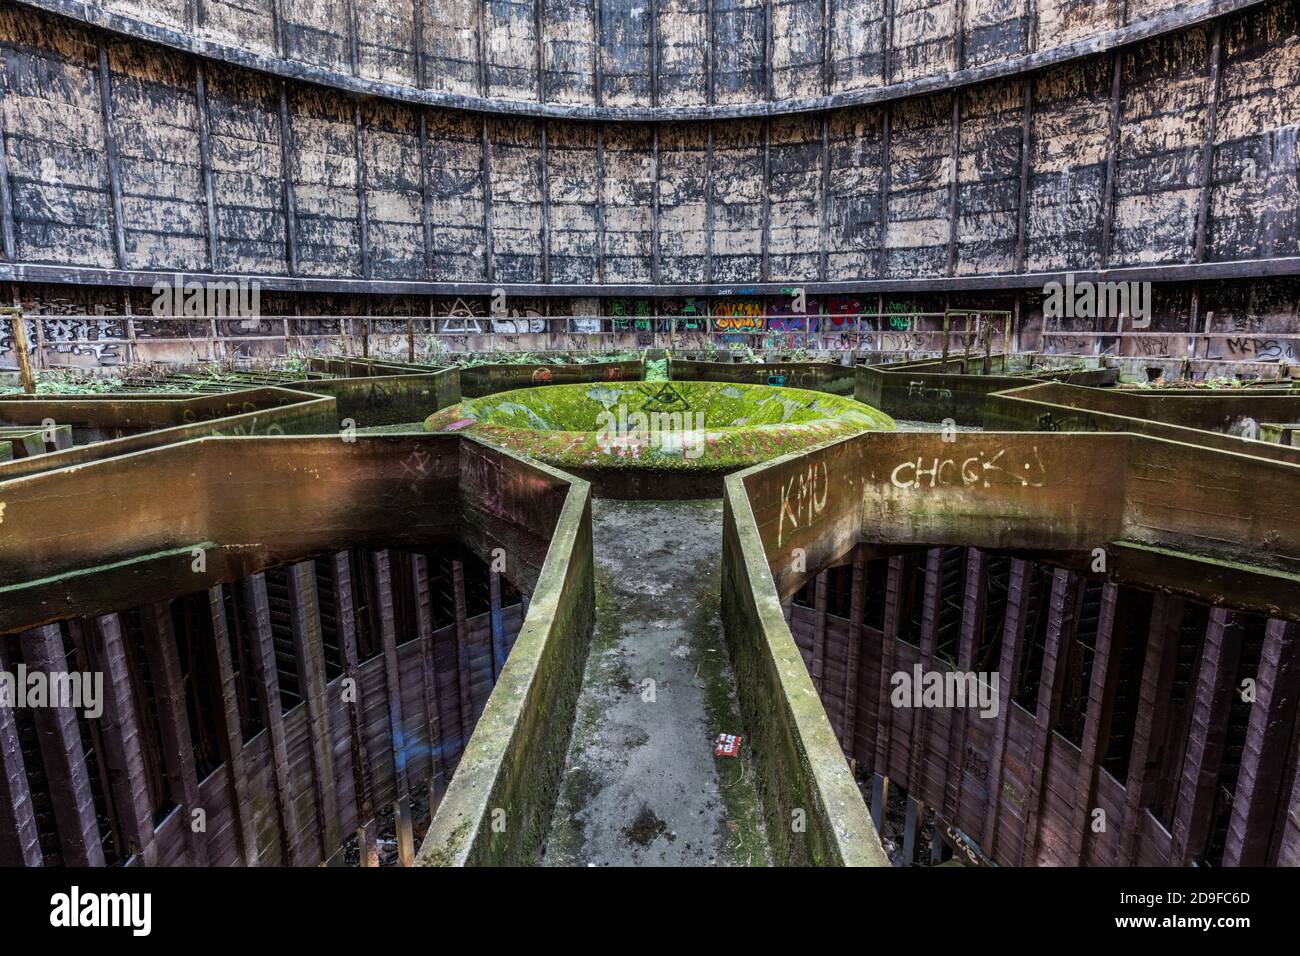 Inside Caen Cooling Tower Stock Photo